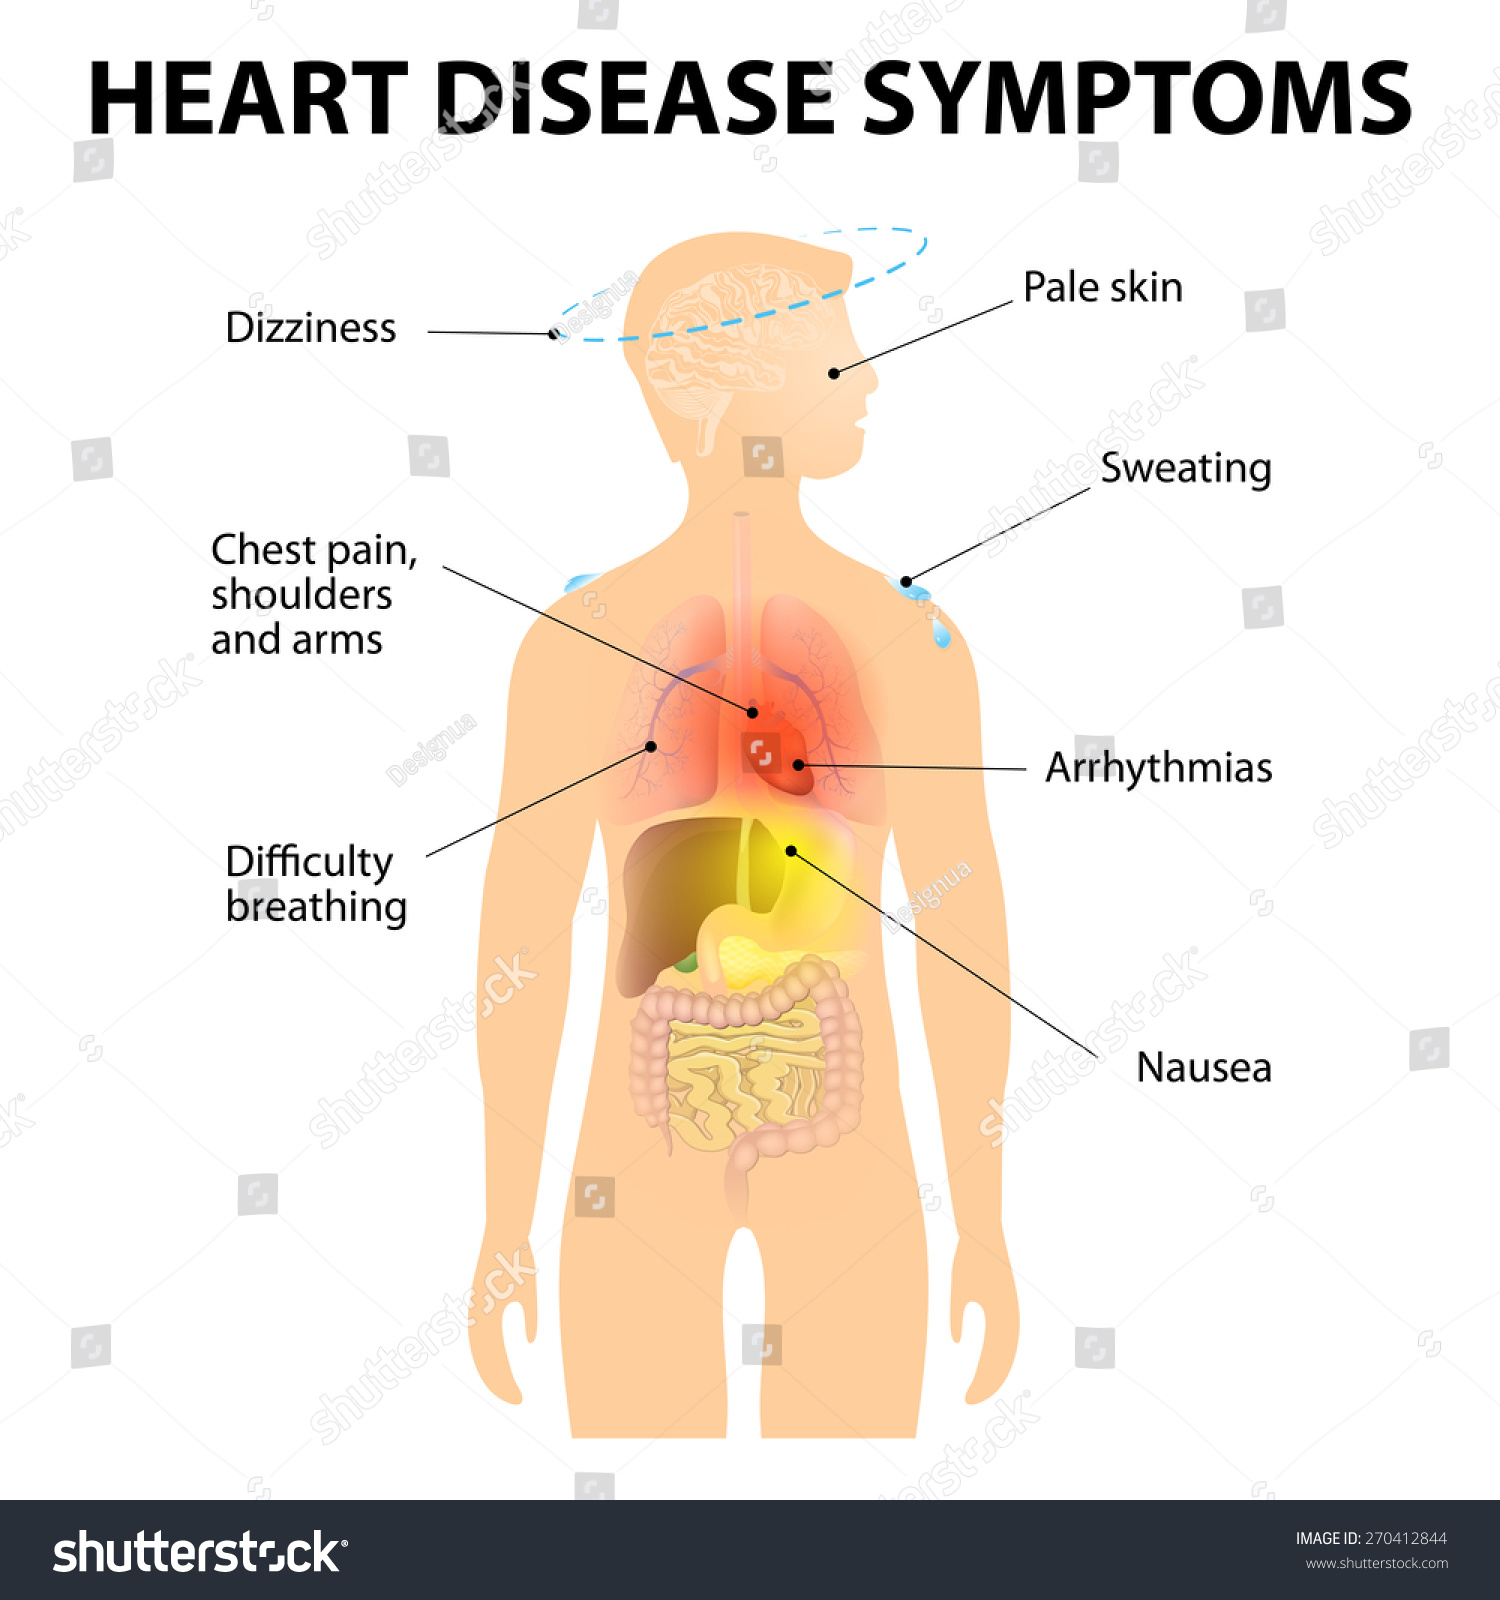 What are some symptoms of heart damage?